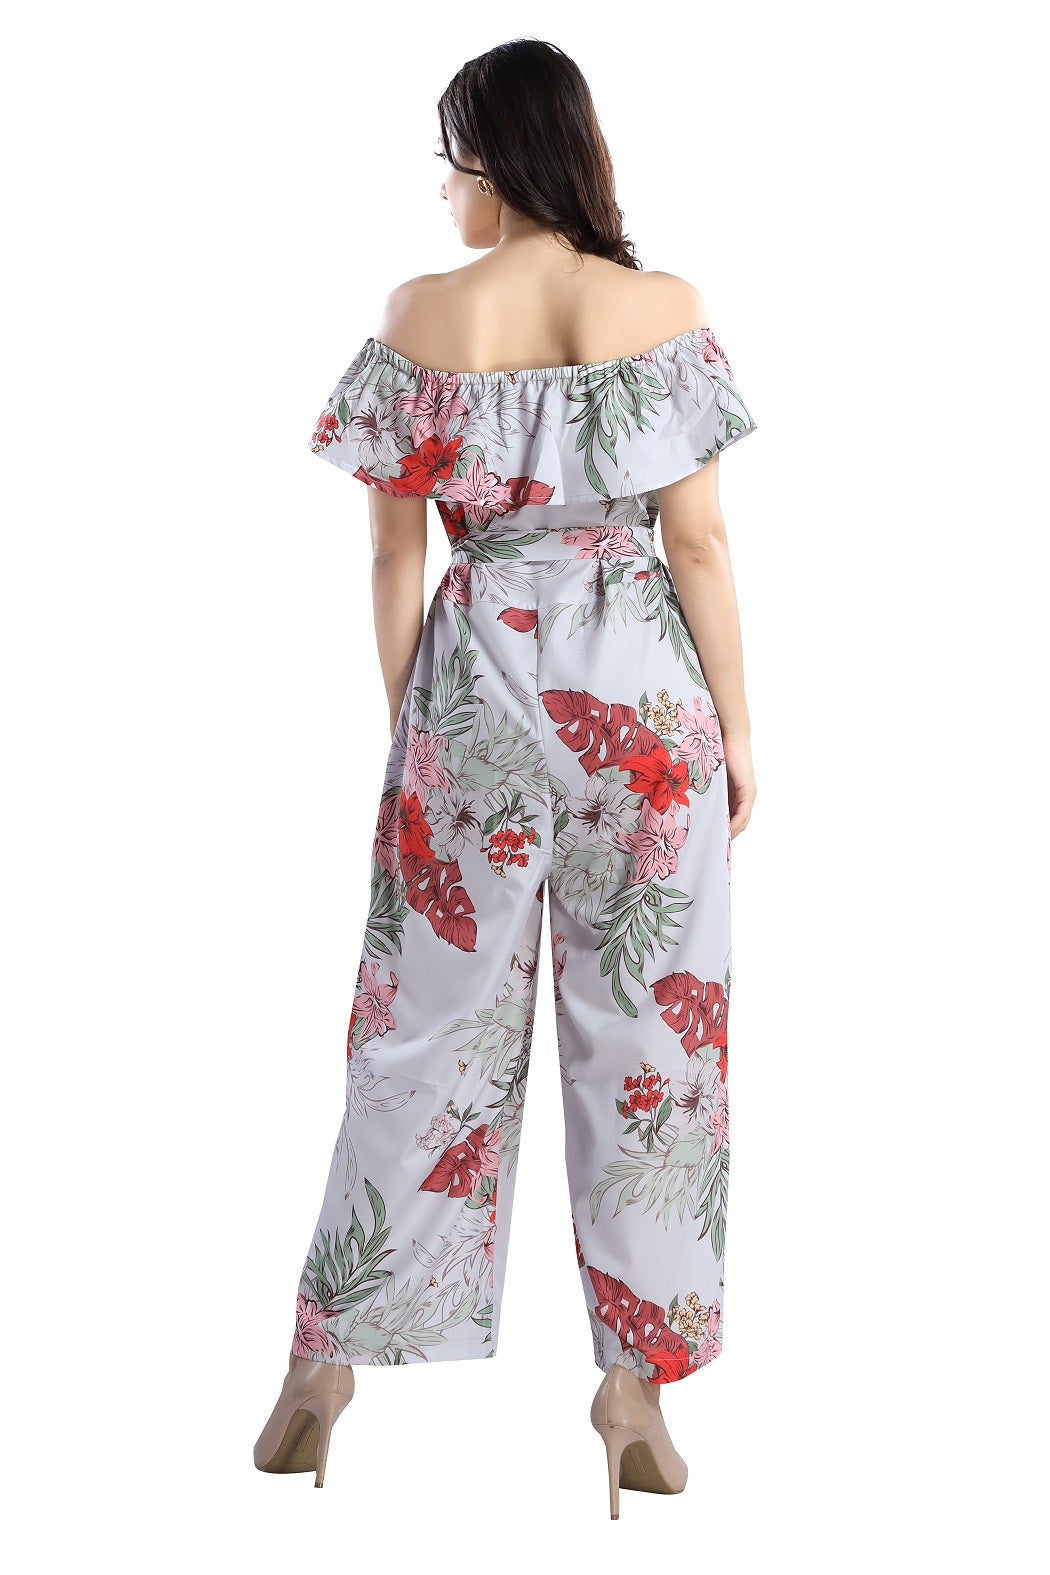 Rose Tropical Floral Spaghetti Straps Belted Plus Size Jumpsuit